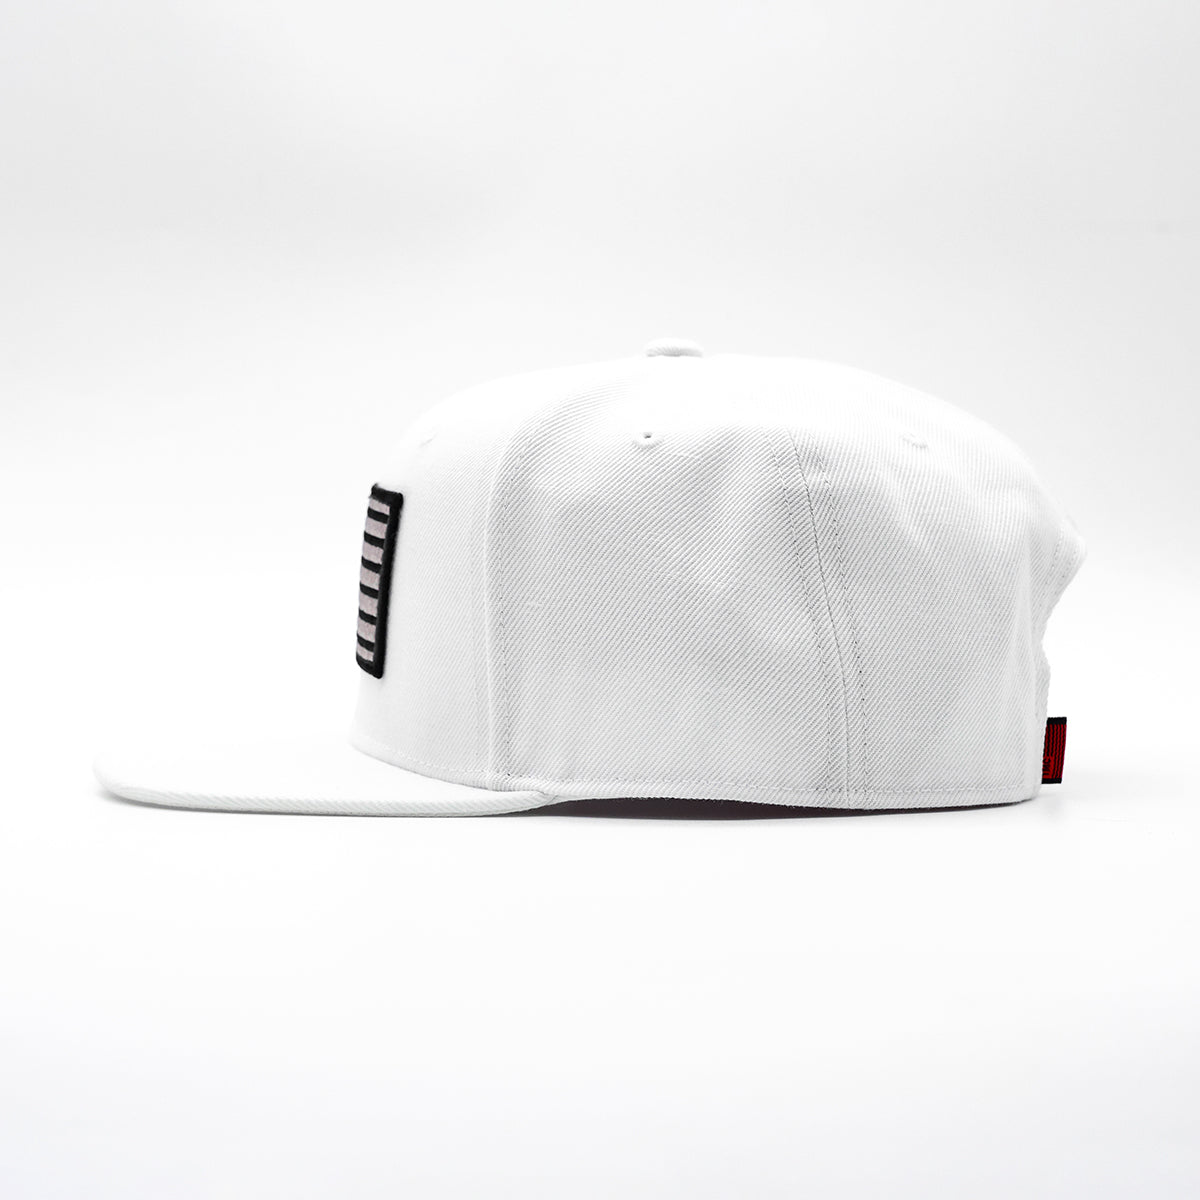 TMC Flag Patch Limited Edition Snapback - White/Black - Side